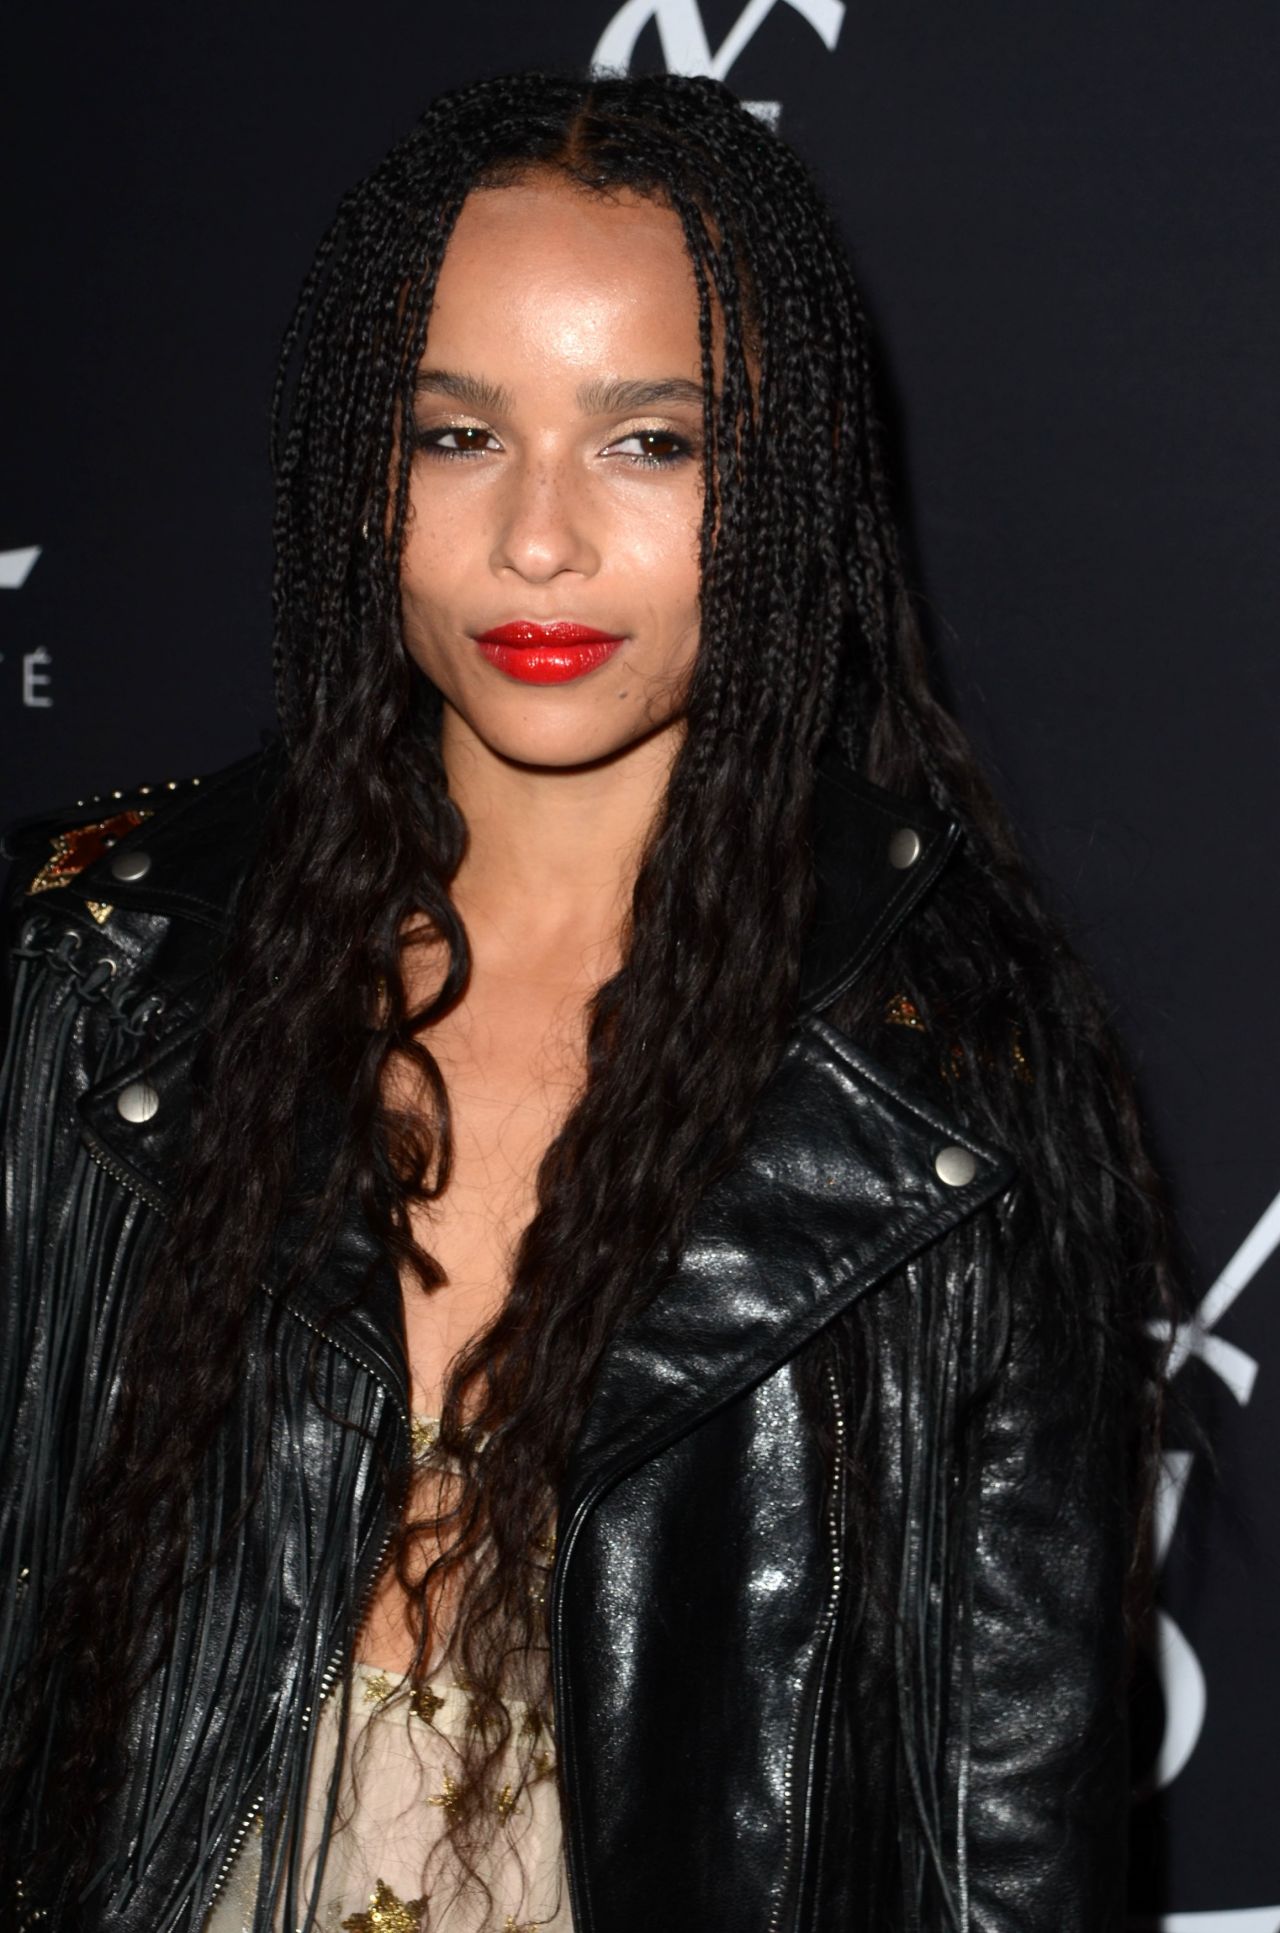 Zoe Kravitz - Yves Saint Laurent Beauty Party in West Hollywood 5/18 ...